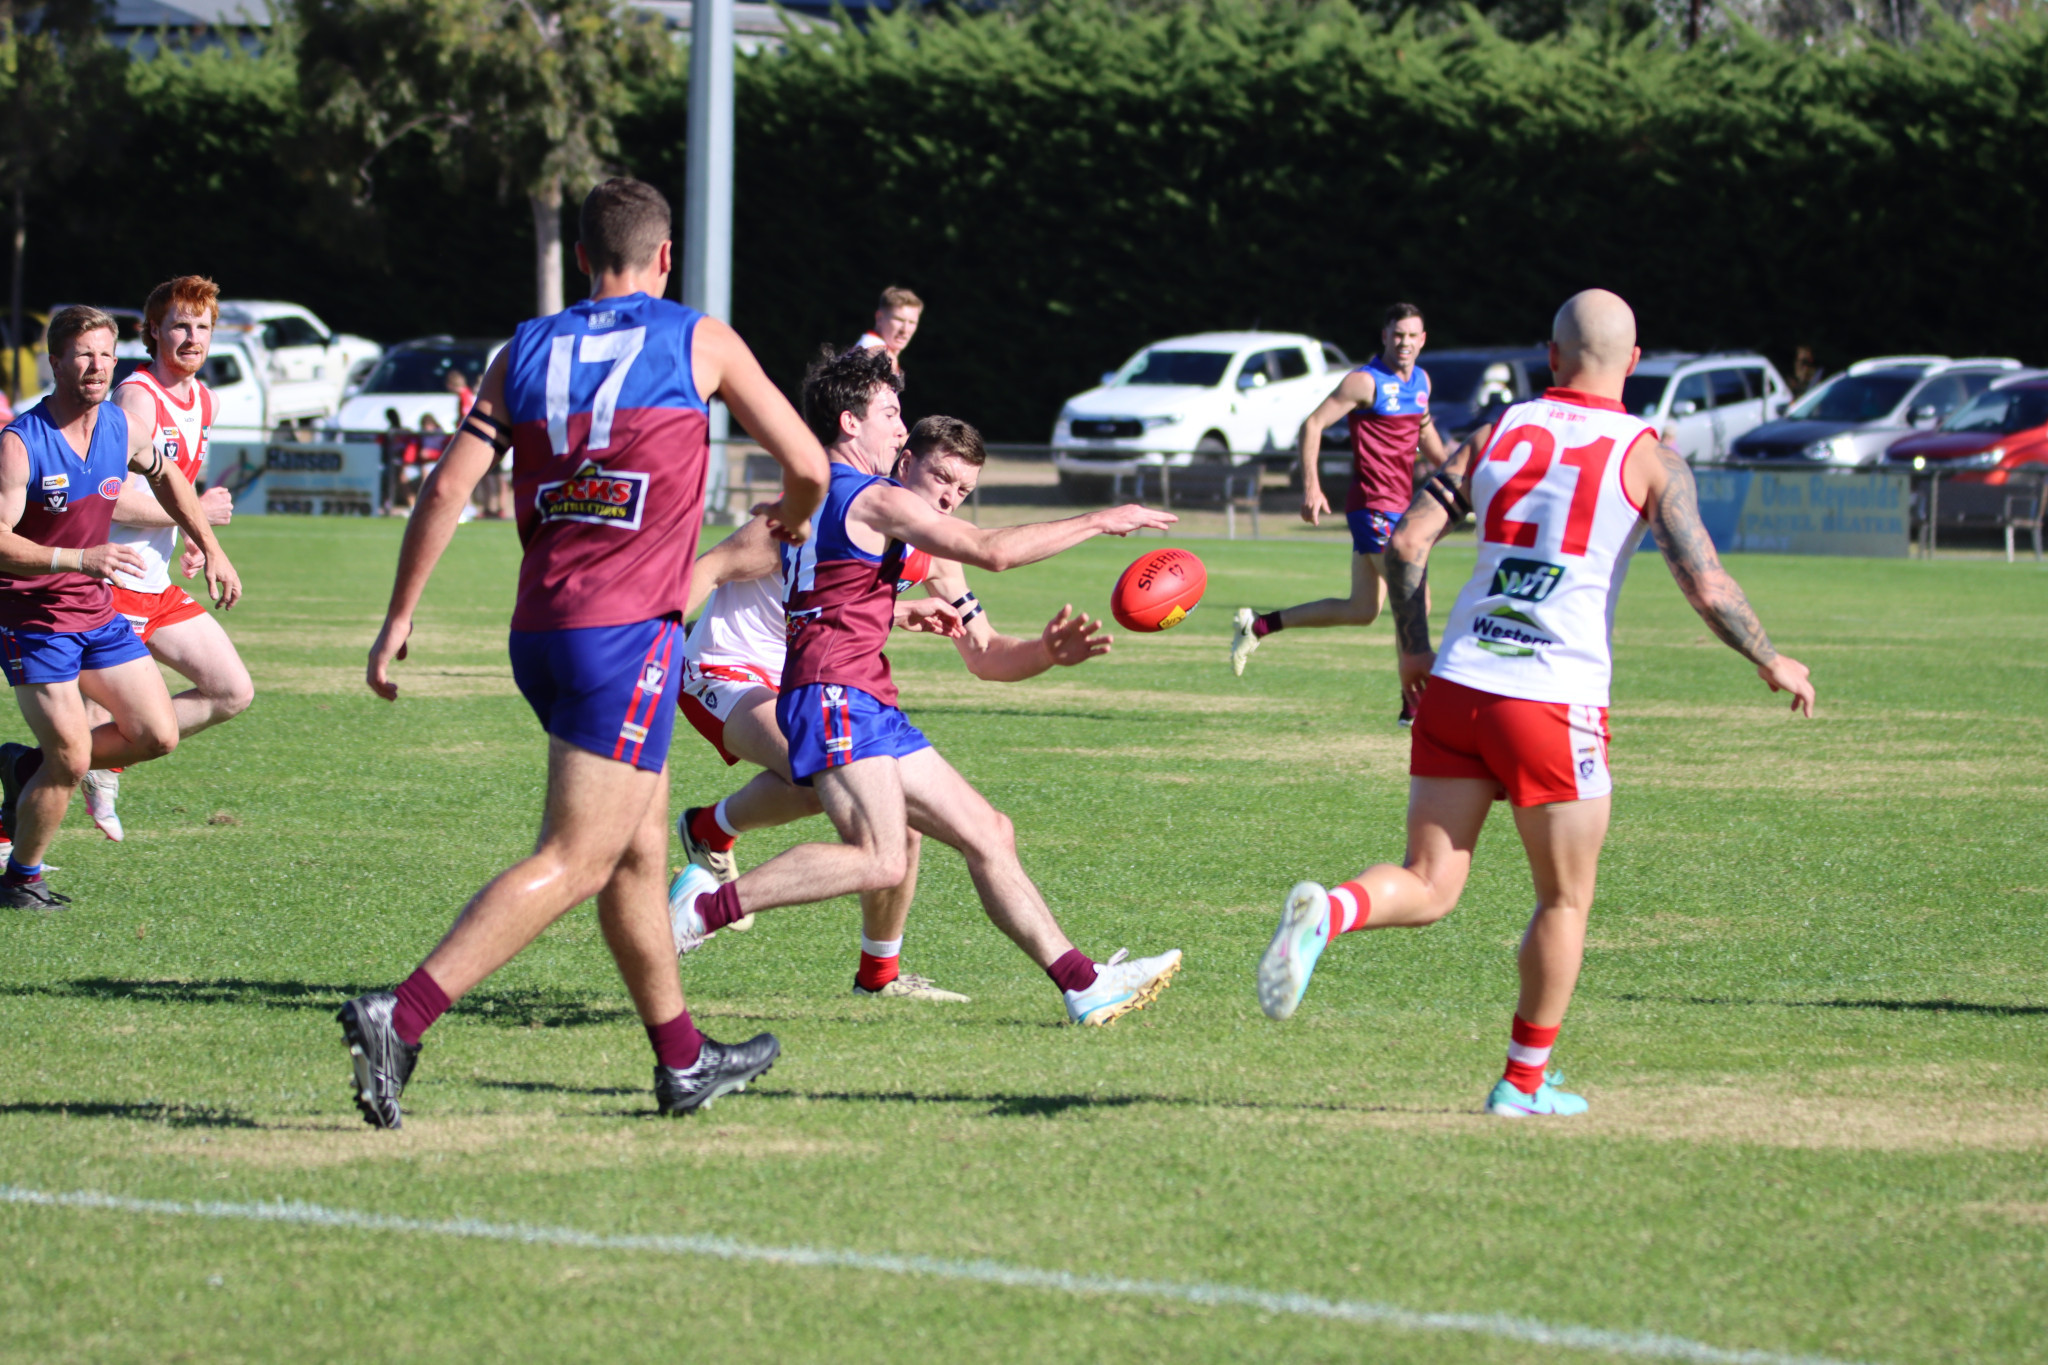 The Demons trailed by one point at 3/4 time against Ararat in round one. PHOTO: CRAIG WILSON